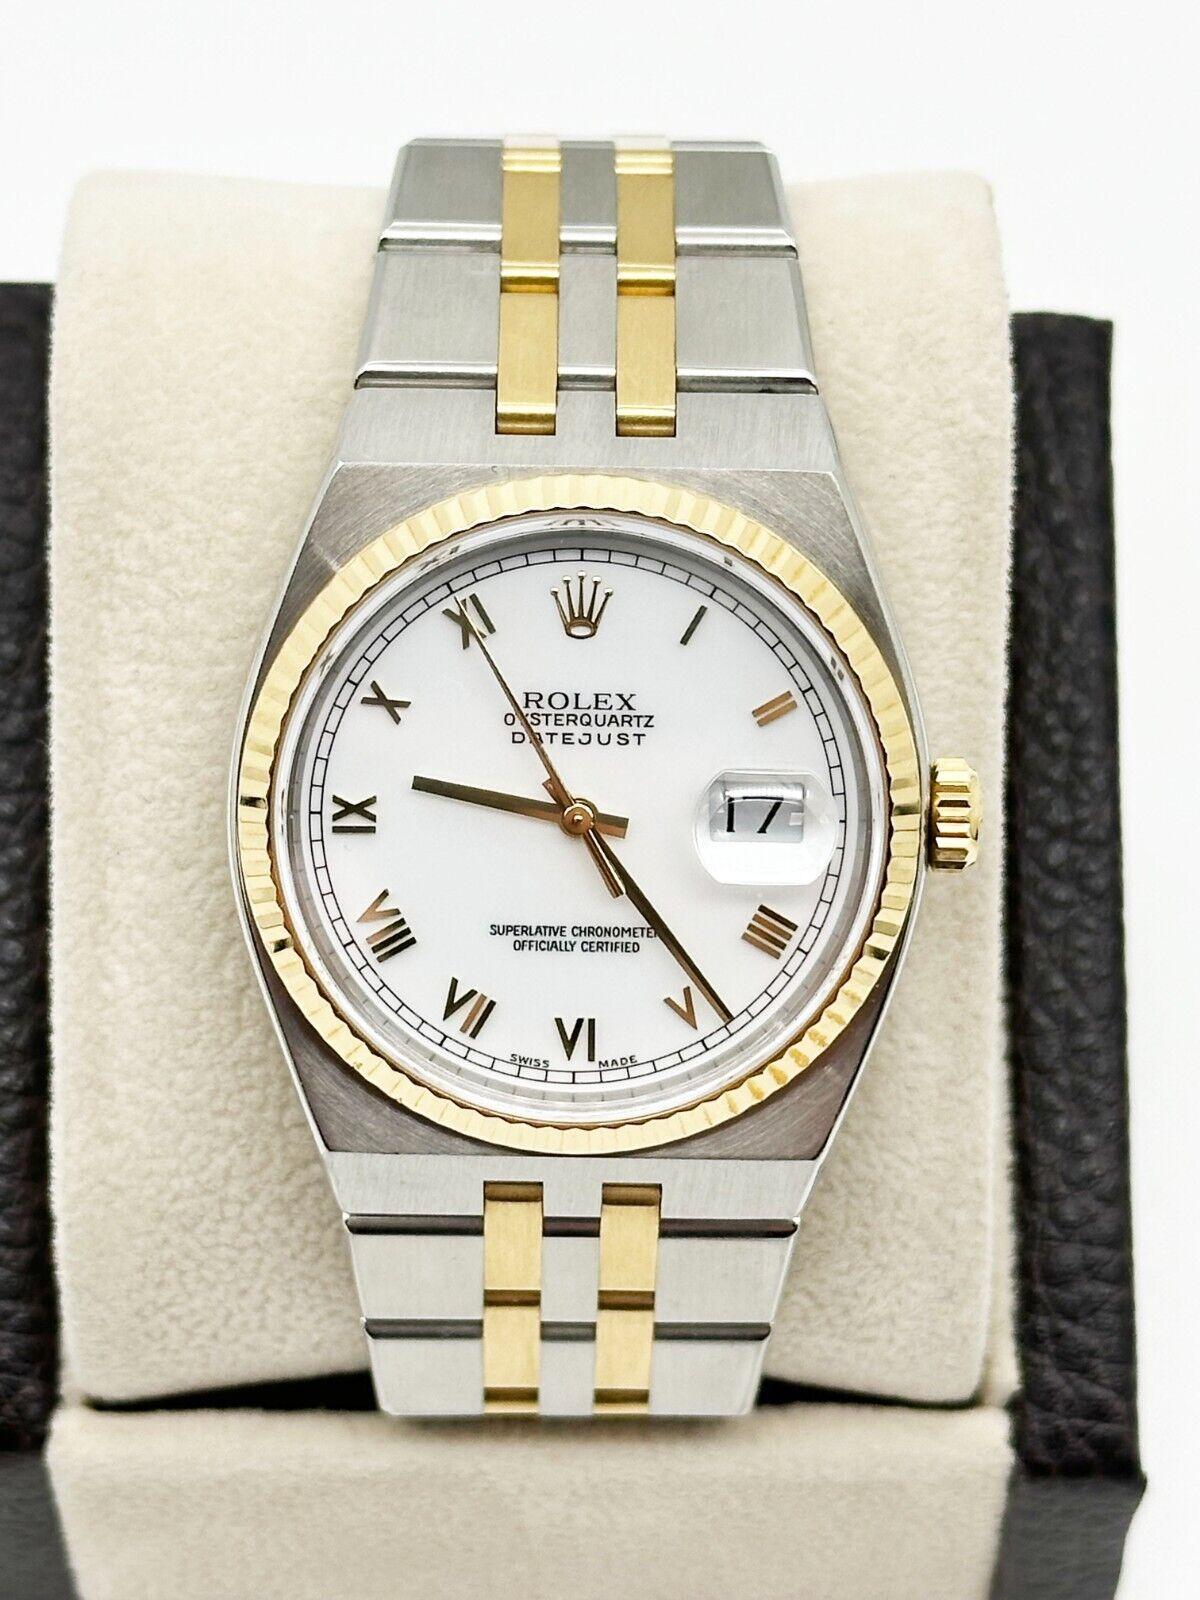 Rolex 17013 Datejust Oysterquartz White Dial 18K Yellow Gold Stainless Steel In Excellent Condition For Sale In San Diego, CA